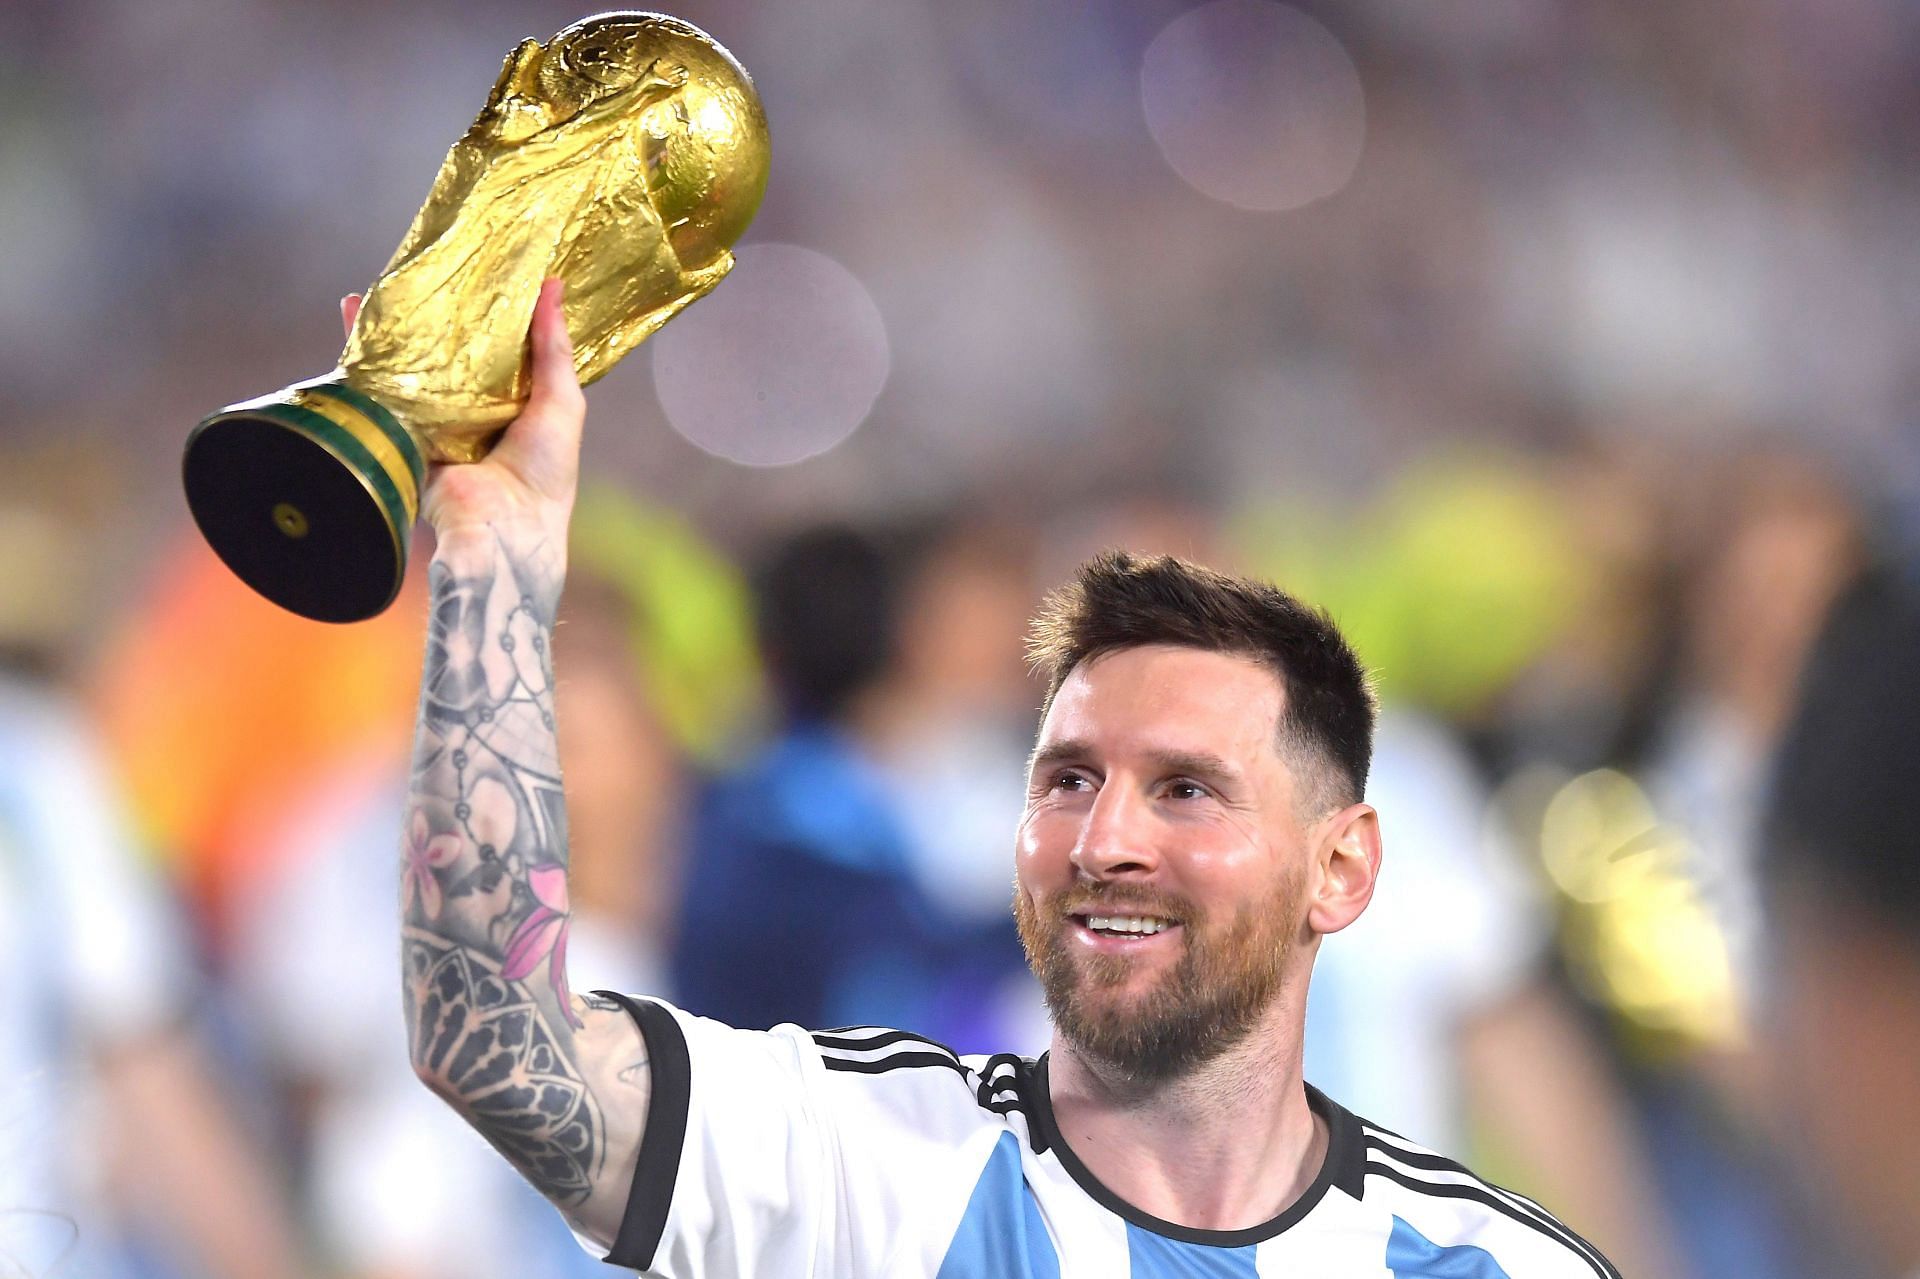 Lionel Messi has expressed his delight at winning the World Cup.